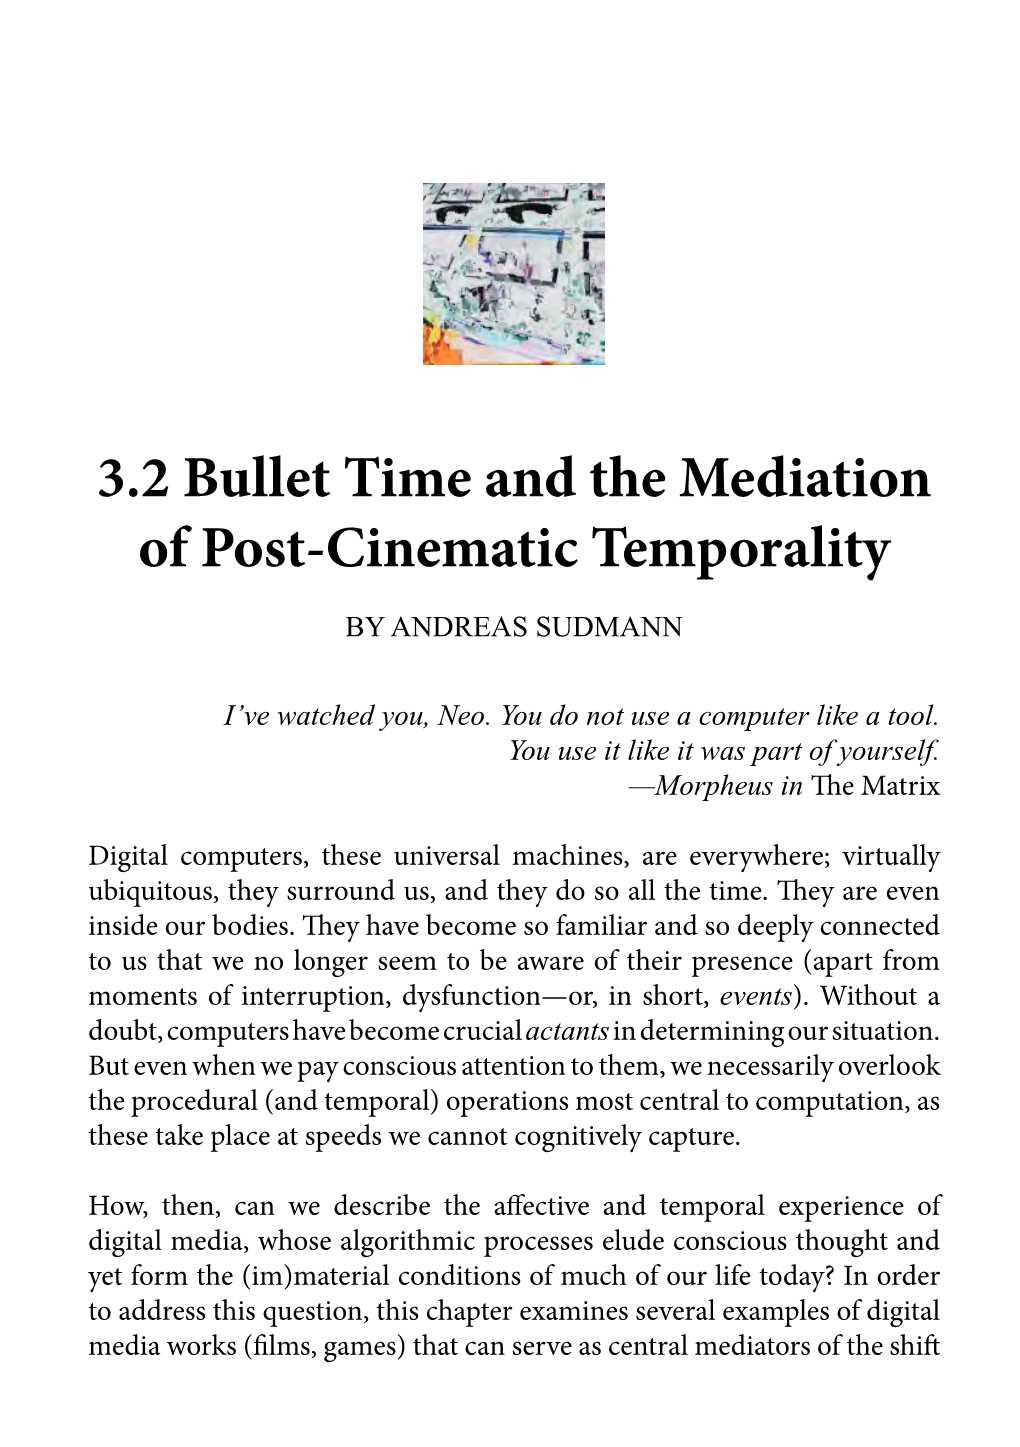 3.2 Bullet Time and the Mediation of Post-Cinematic Temporality by ANDREAS SUDMANN